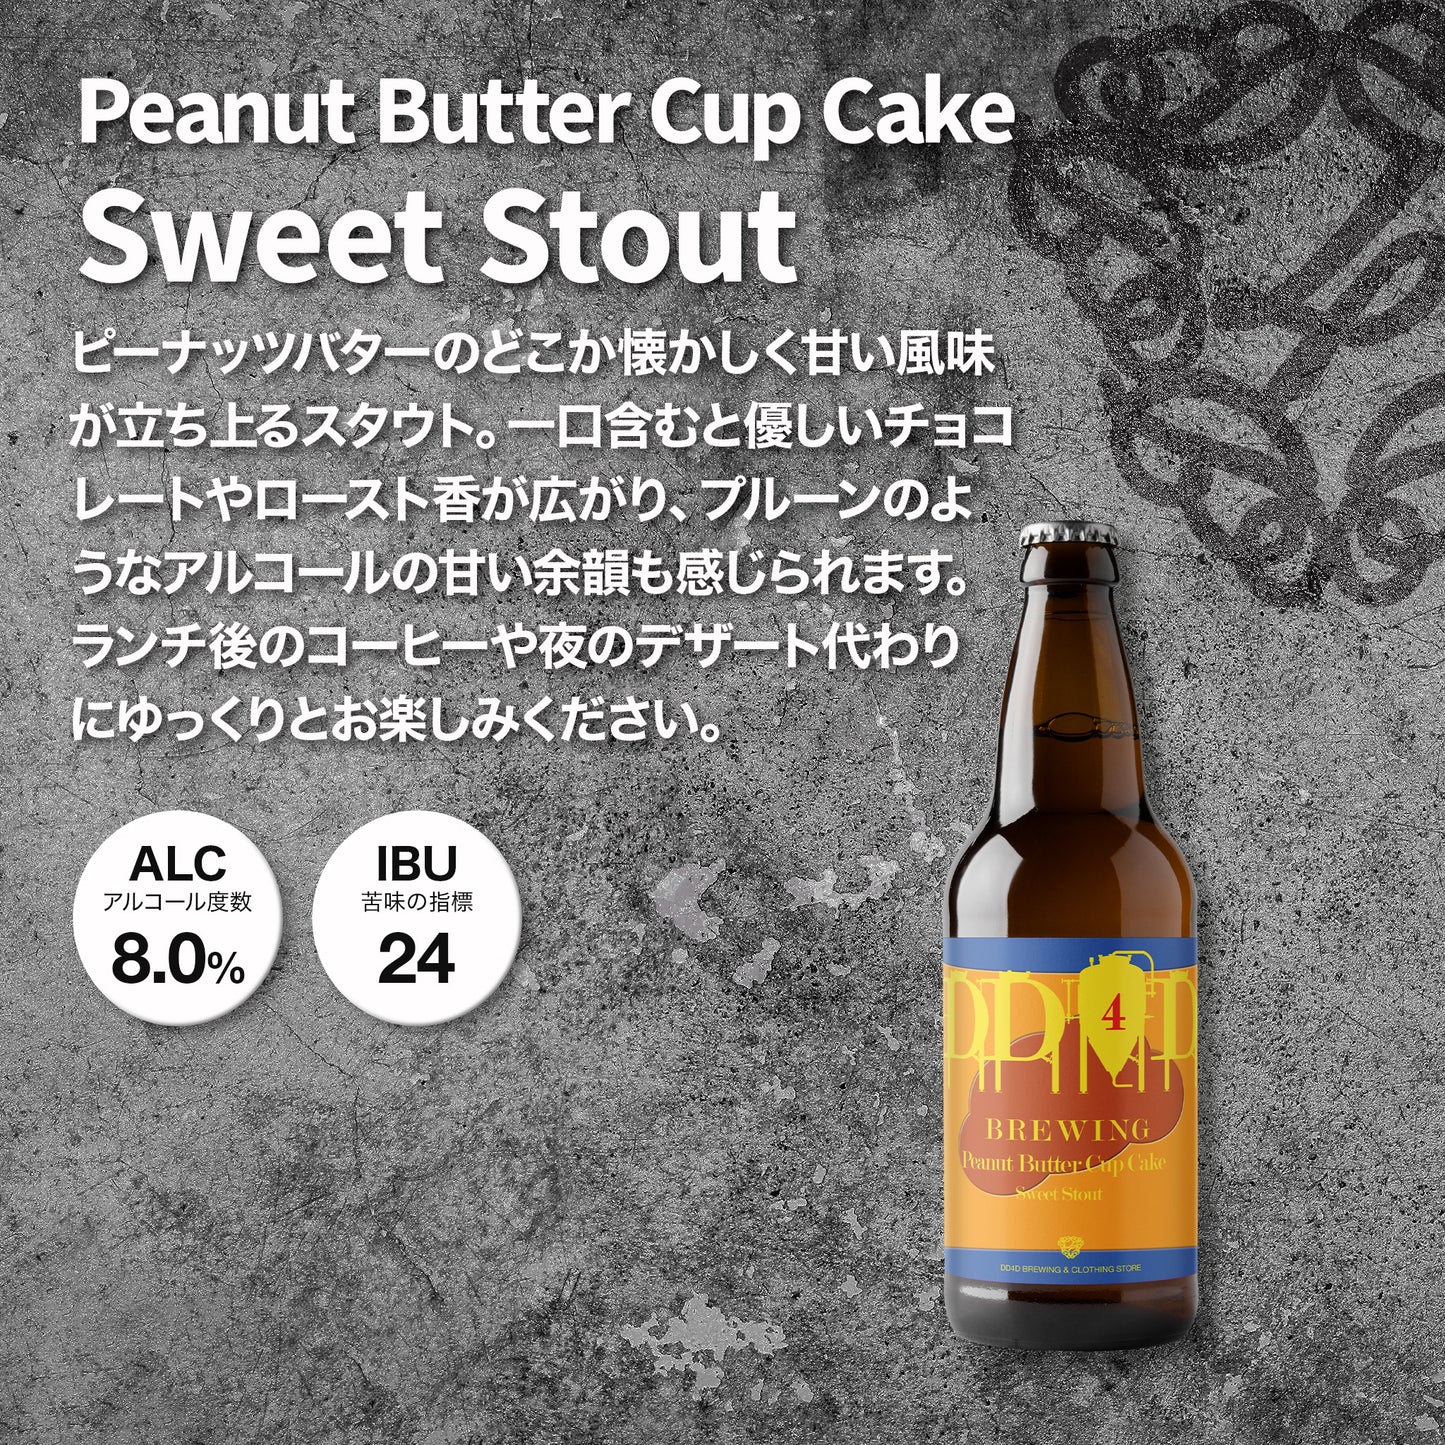 Peanut Butter Cup Cake (Sweet Stout)